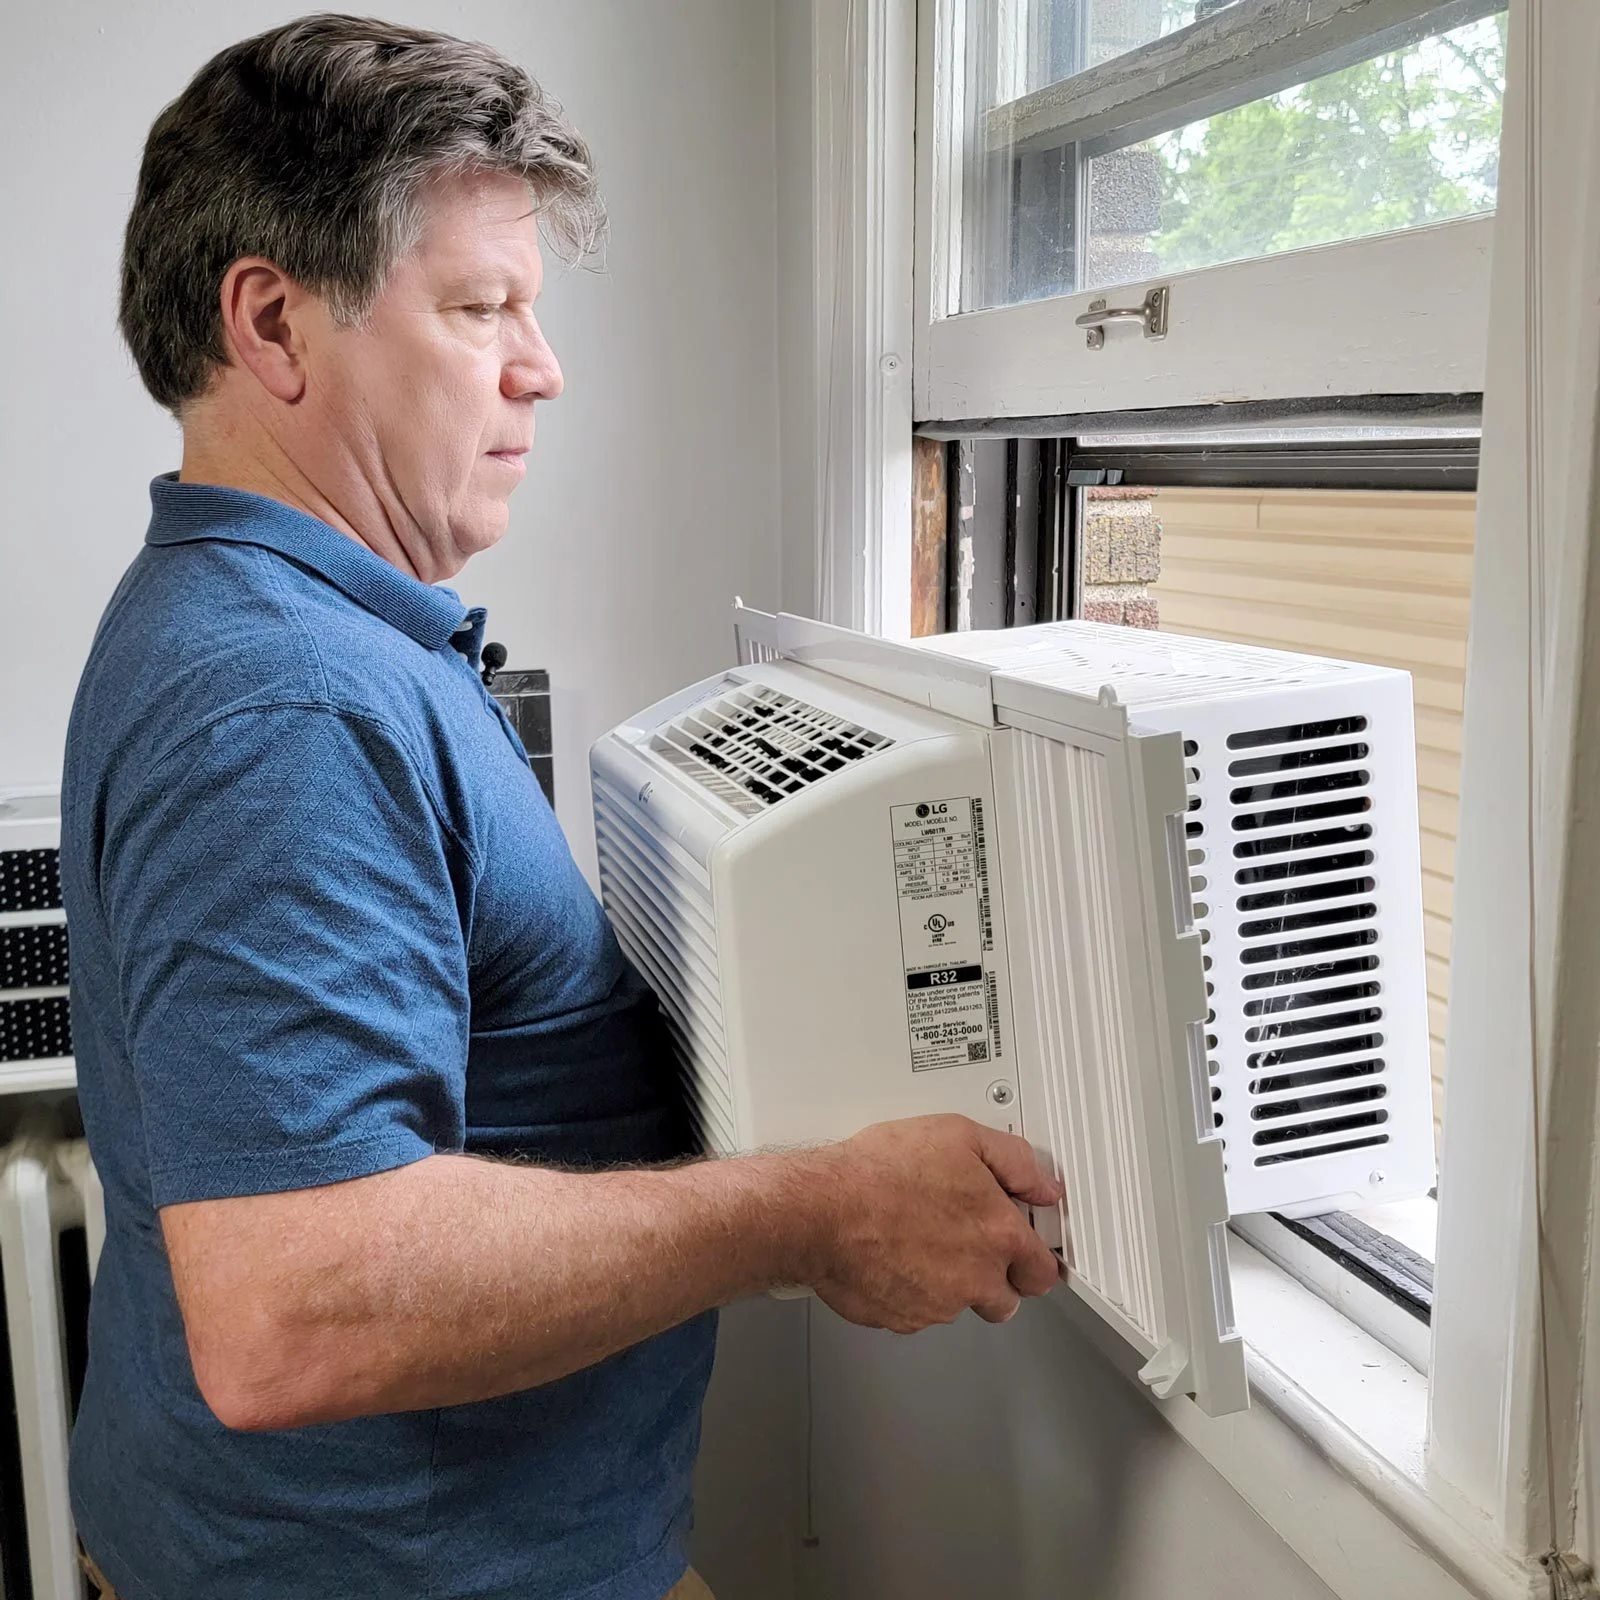 consider getting a larger AC unit